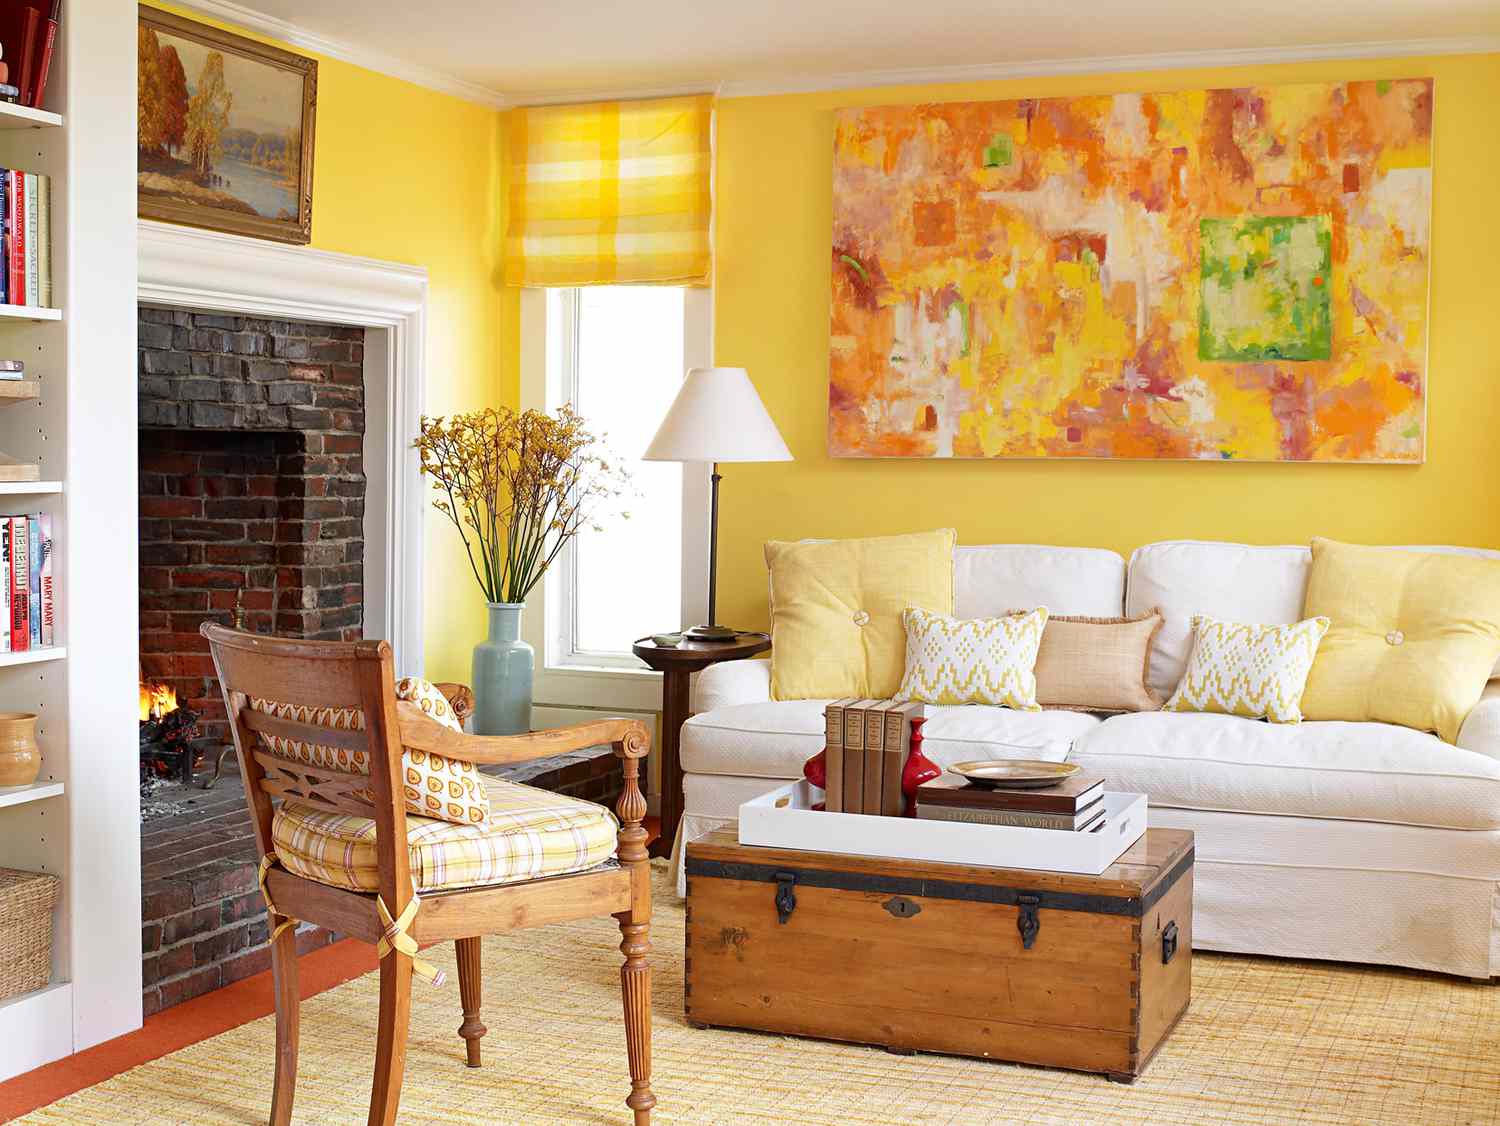 Decorating With Yellow Better Homes Gardens